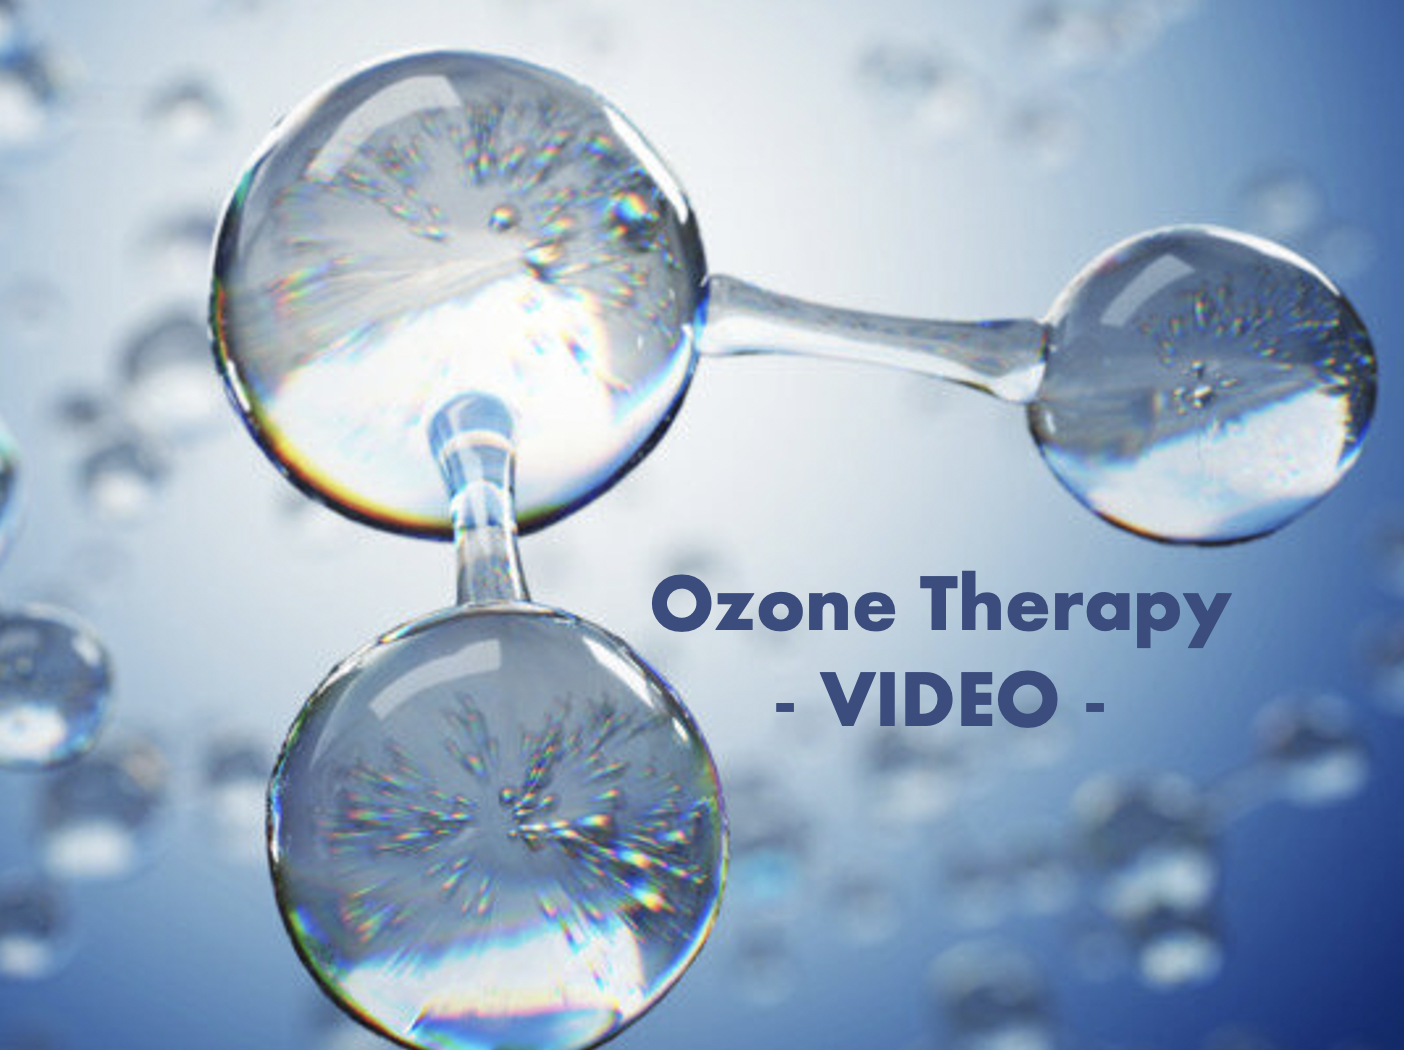 Ozone Therapy is Amazing